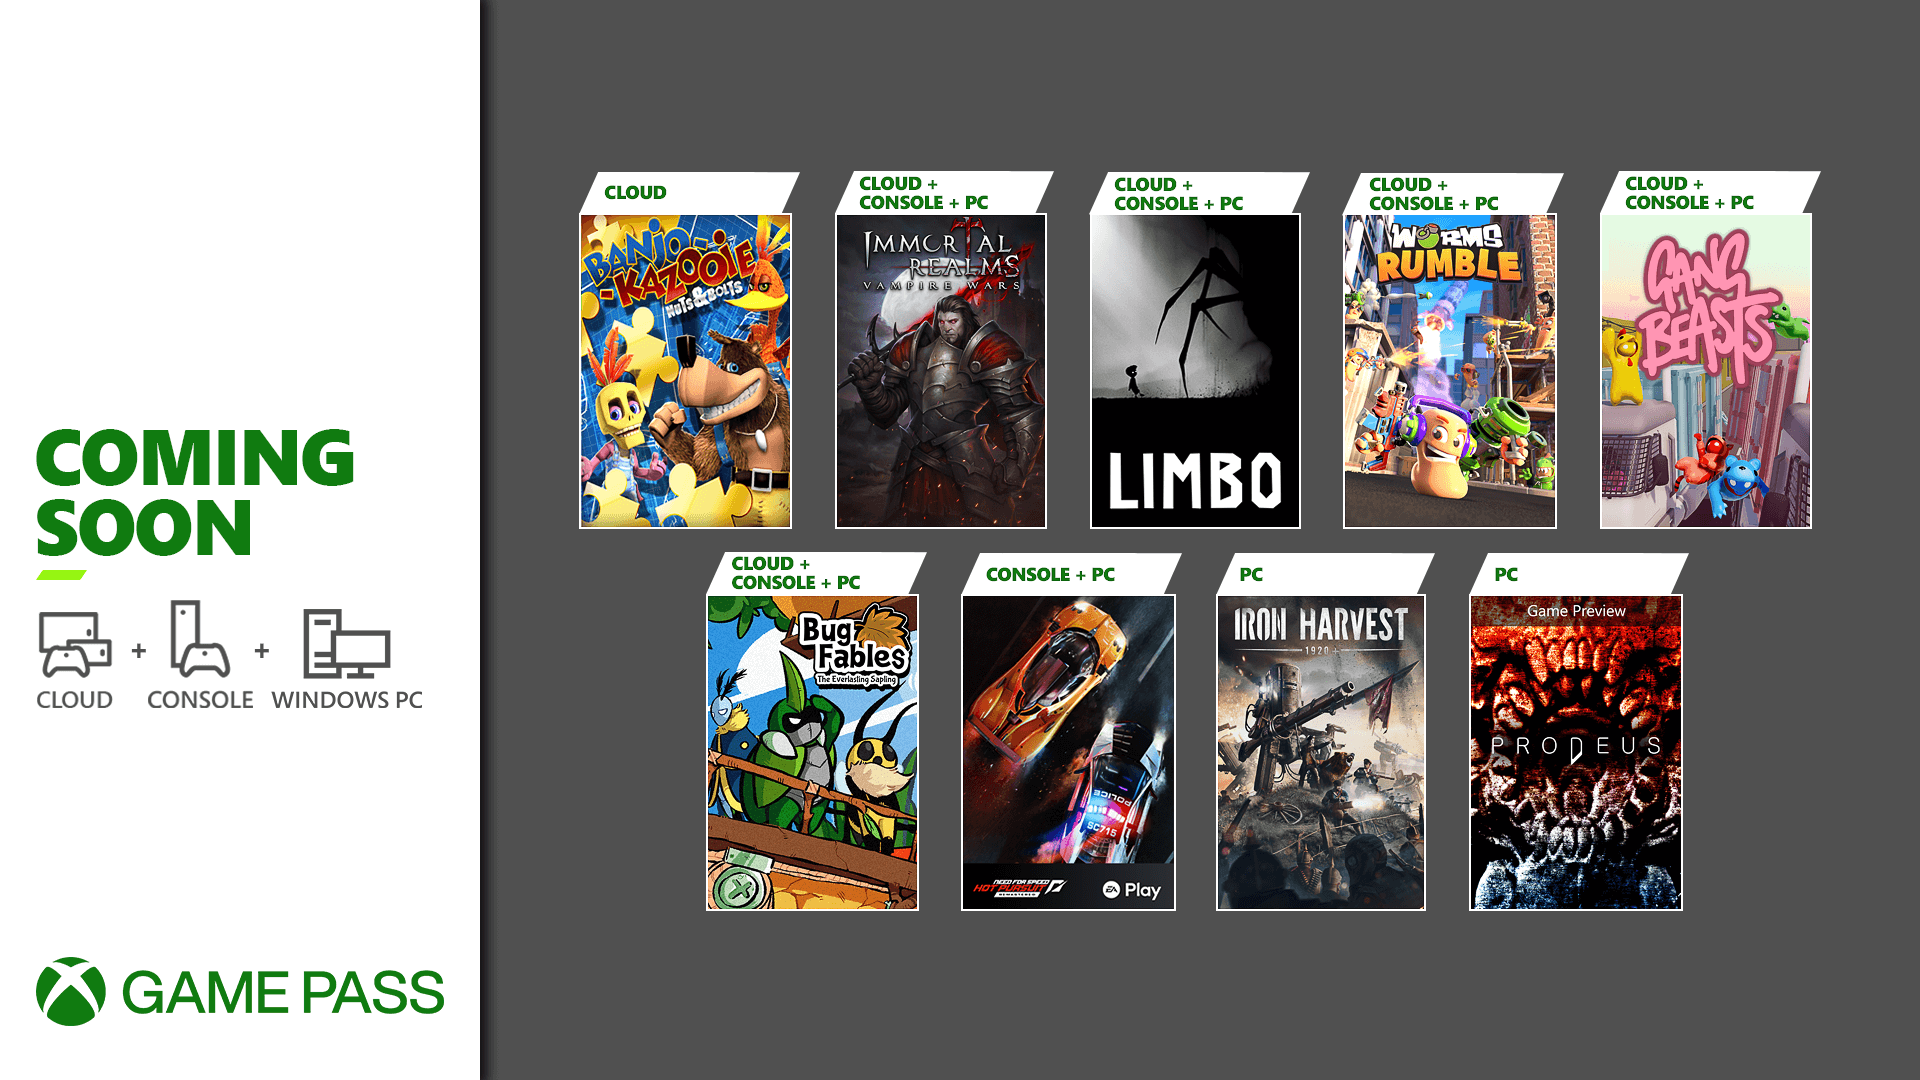 Banjo Kazooie: Nuts and Bolts, Immortal Realms: Vampire Wars, Limbo, Worms Rumble, Gang Beasts, Bug Fables: The Everlasting Sapling, Need for Speed: Hot Pursuit Remastered, Iron Harvest, and Prodeus are coming soon to Xbox Game Pass.